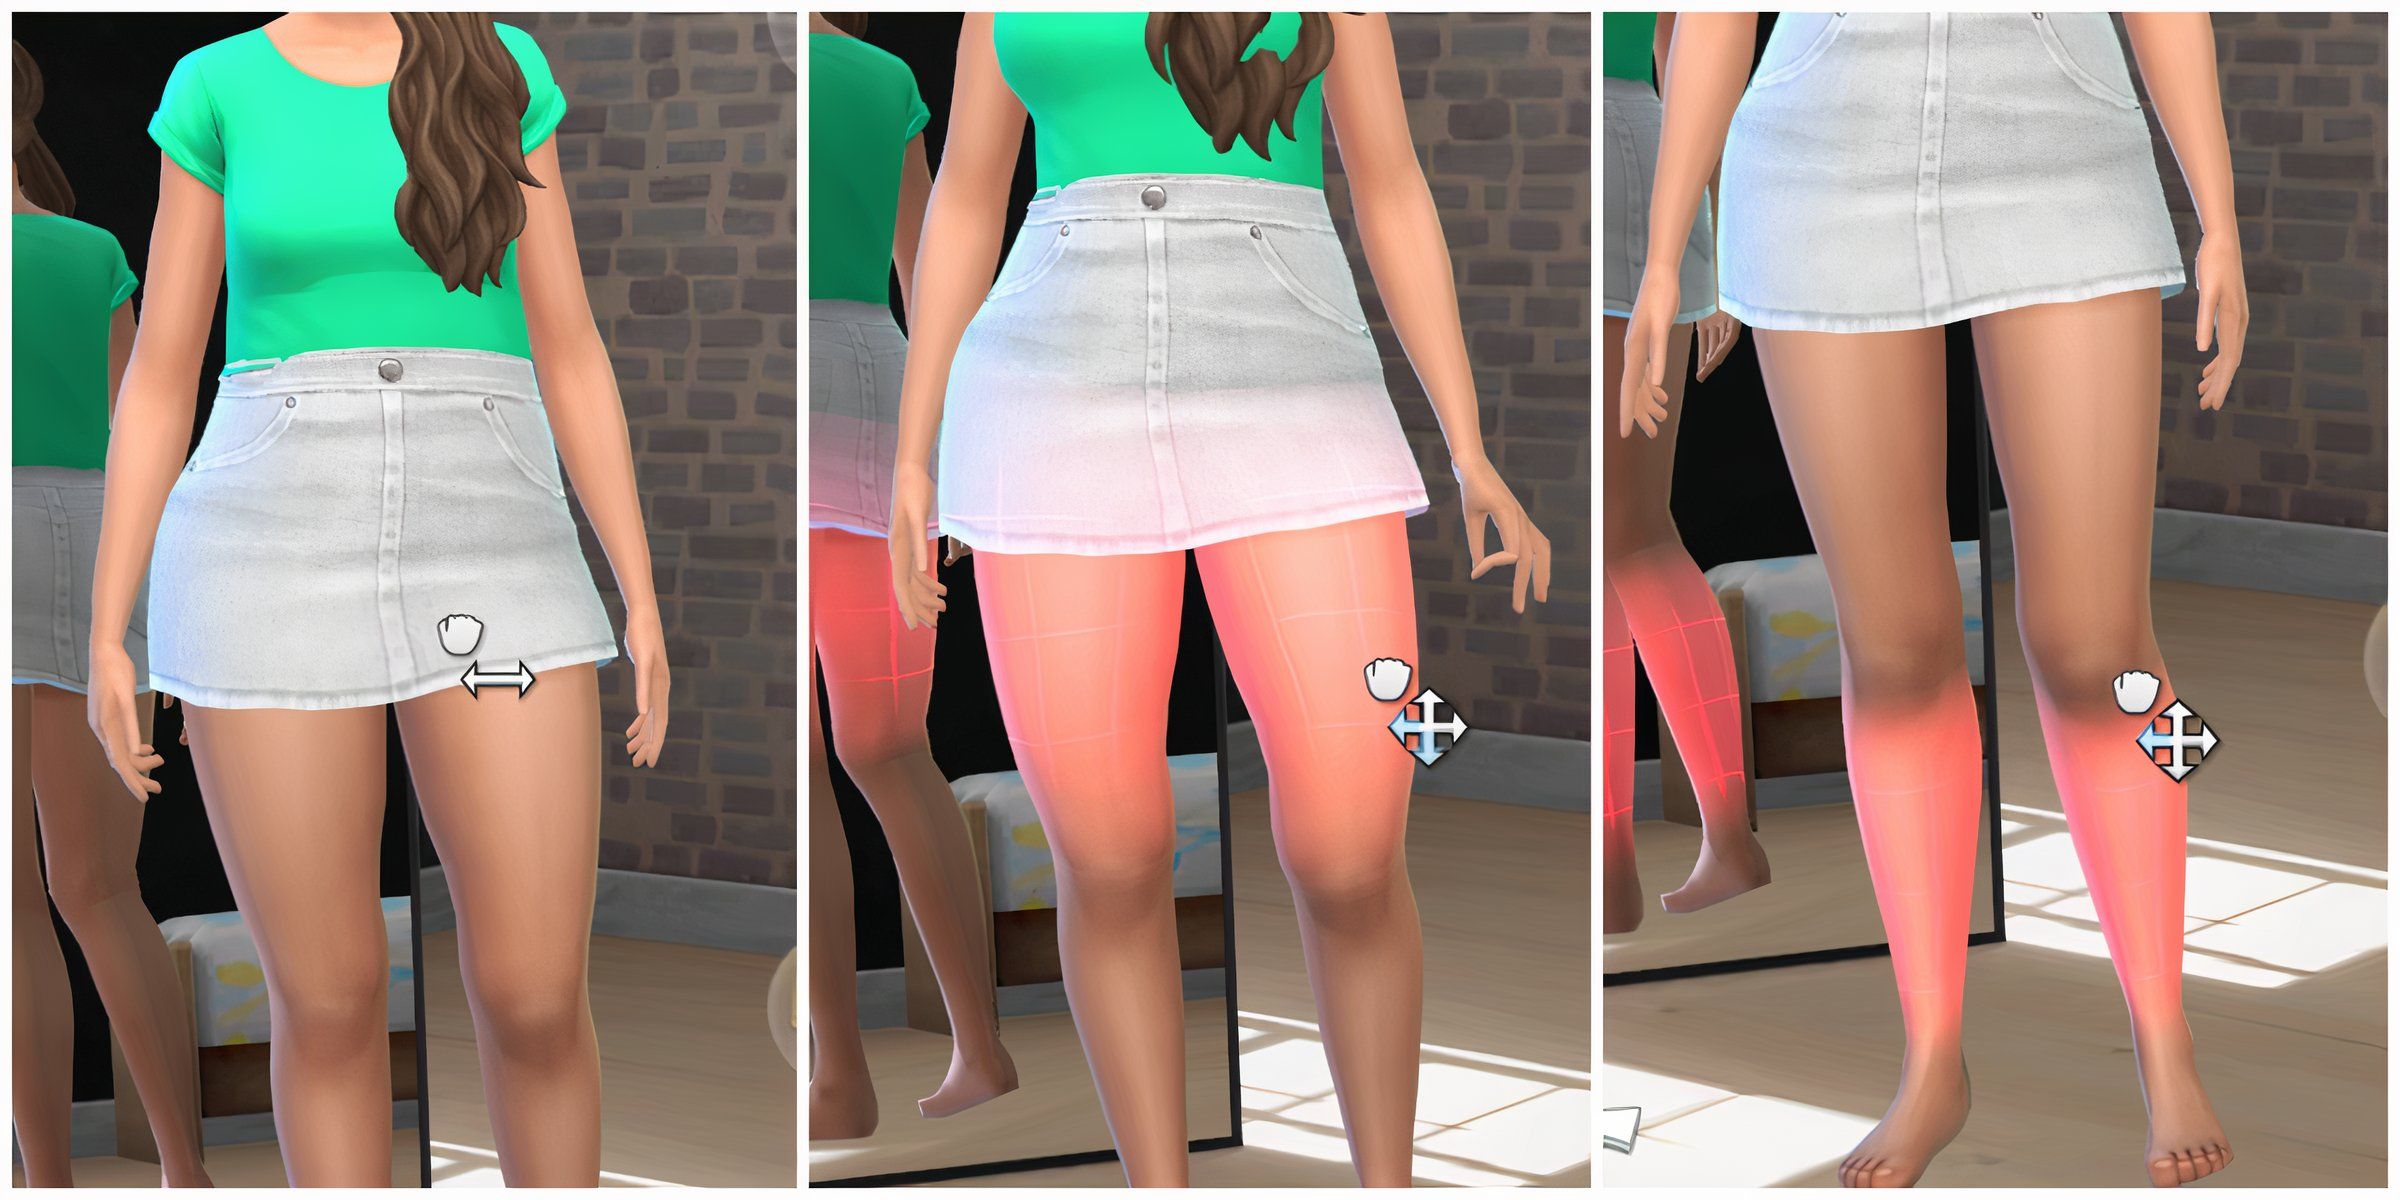 The Body Sliders, For Days... mod adds new sliders to create-a-sim so you can customize Sims more